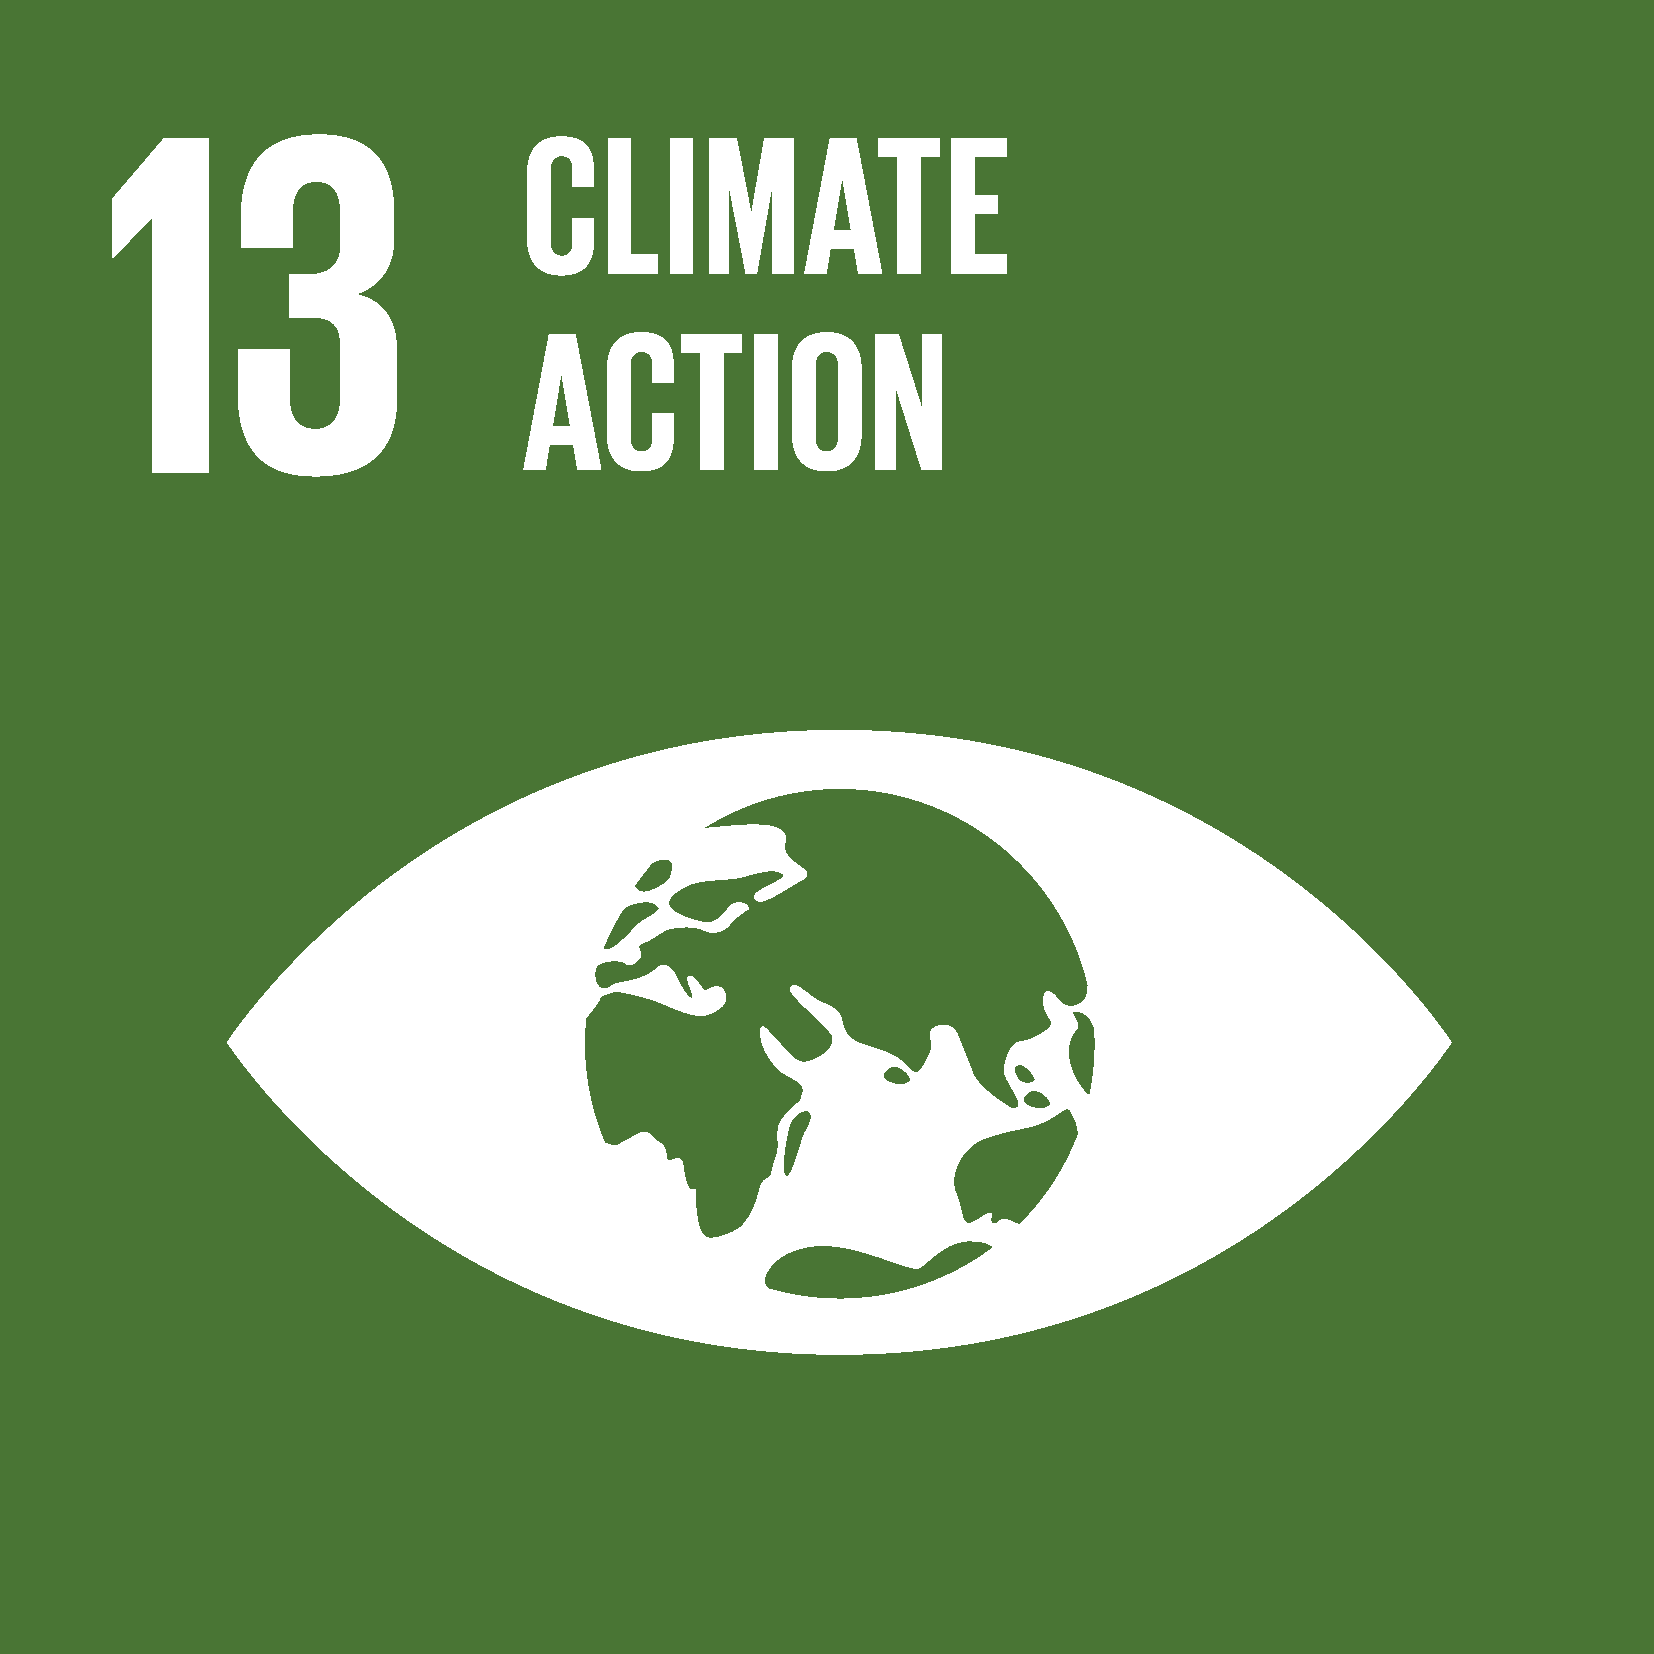 The Global Goal 13 Climate Action